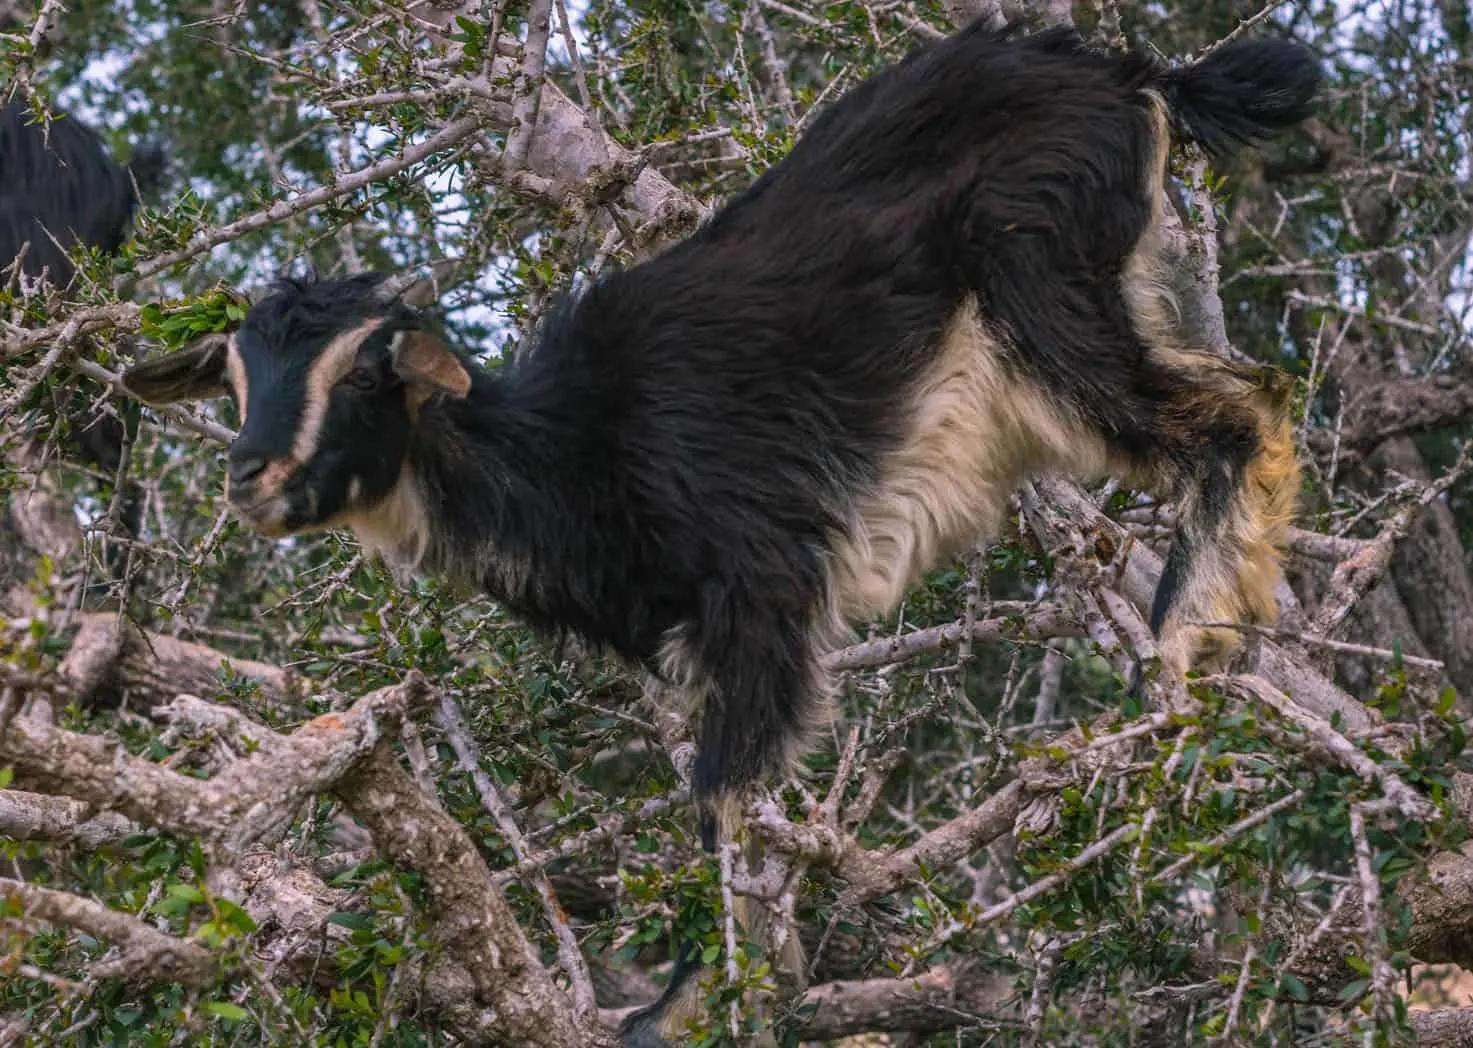 Goats climbing in trees in Morocco